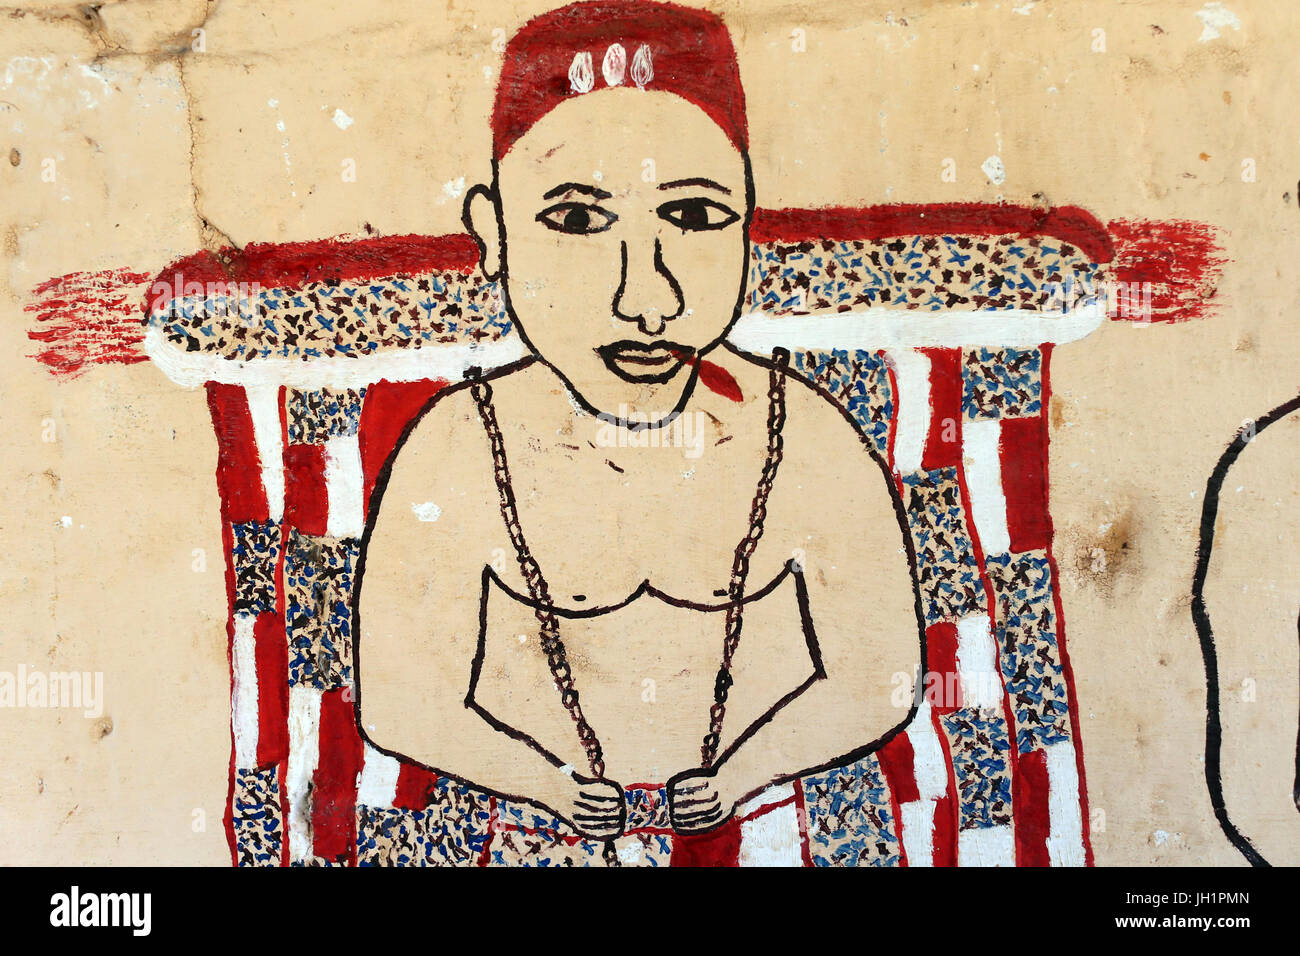 Voodoo wall painting on a convent. Togoville, Togo. Stock Photo